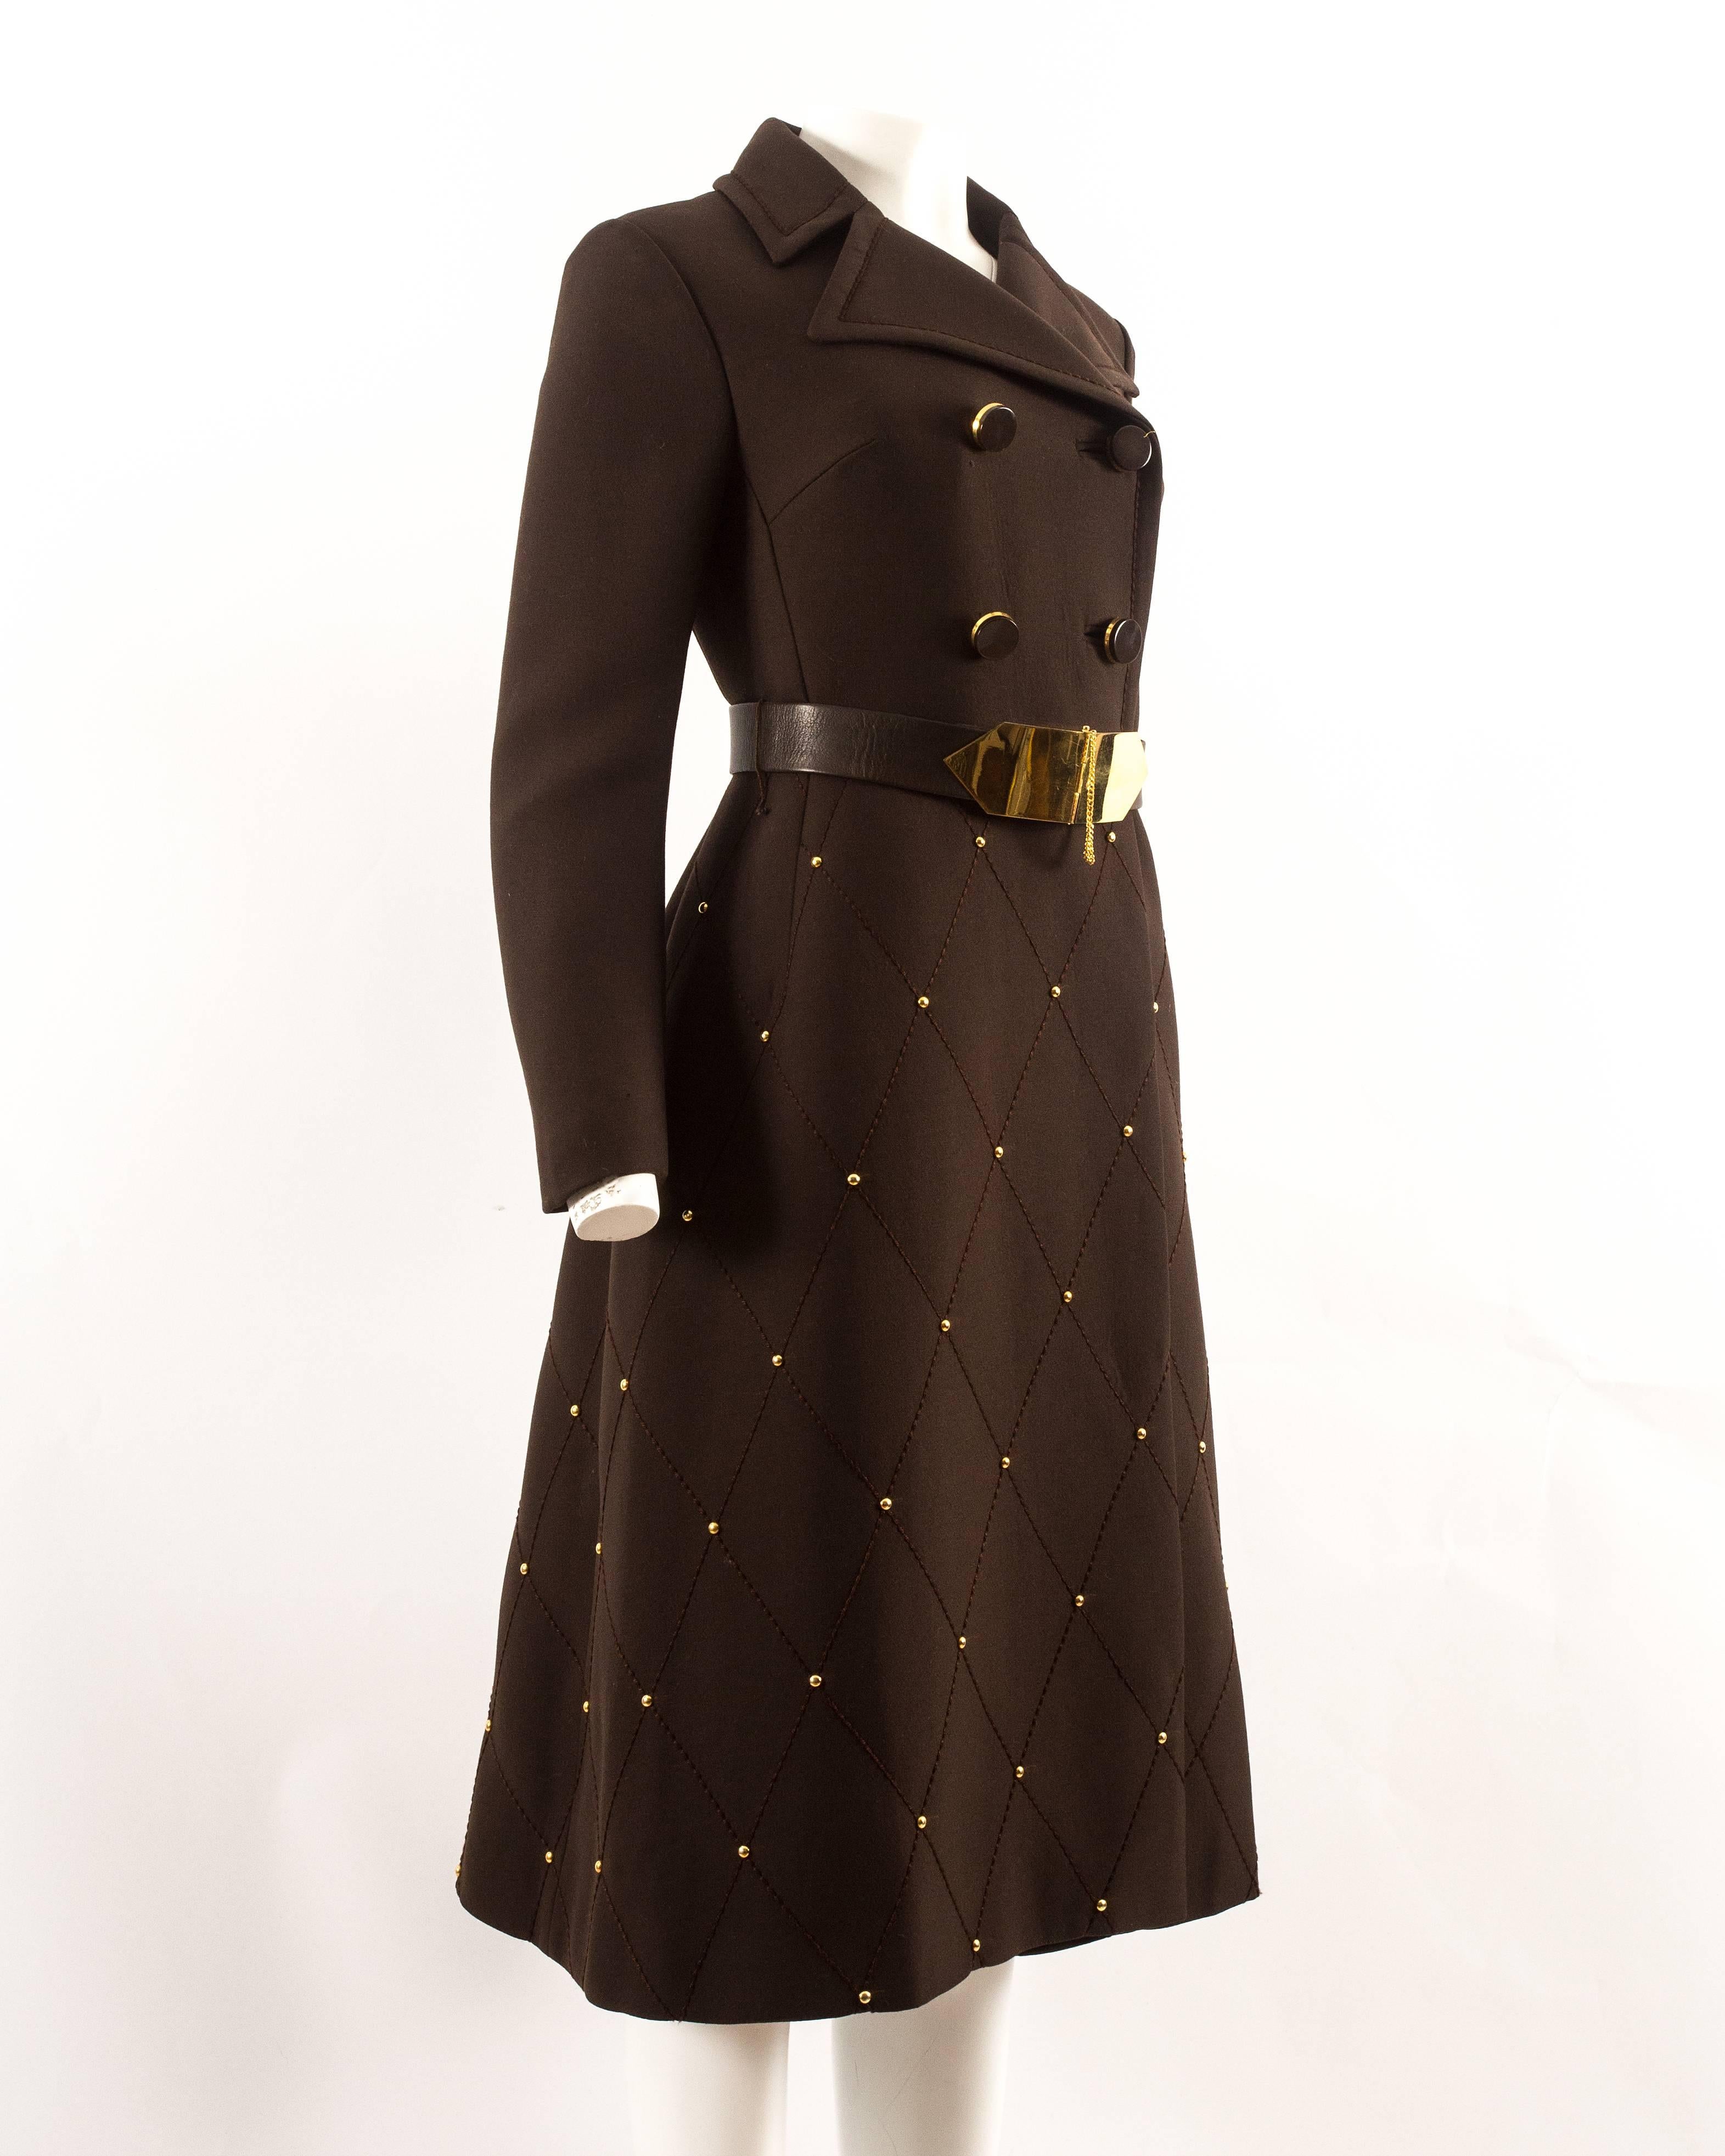 1960s brown wool coat with gold studs and belt, made to a couture standard.